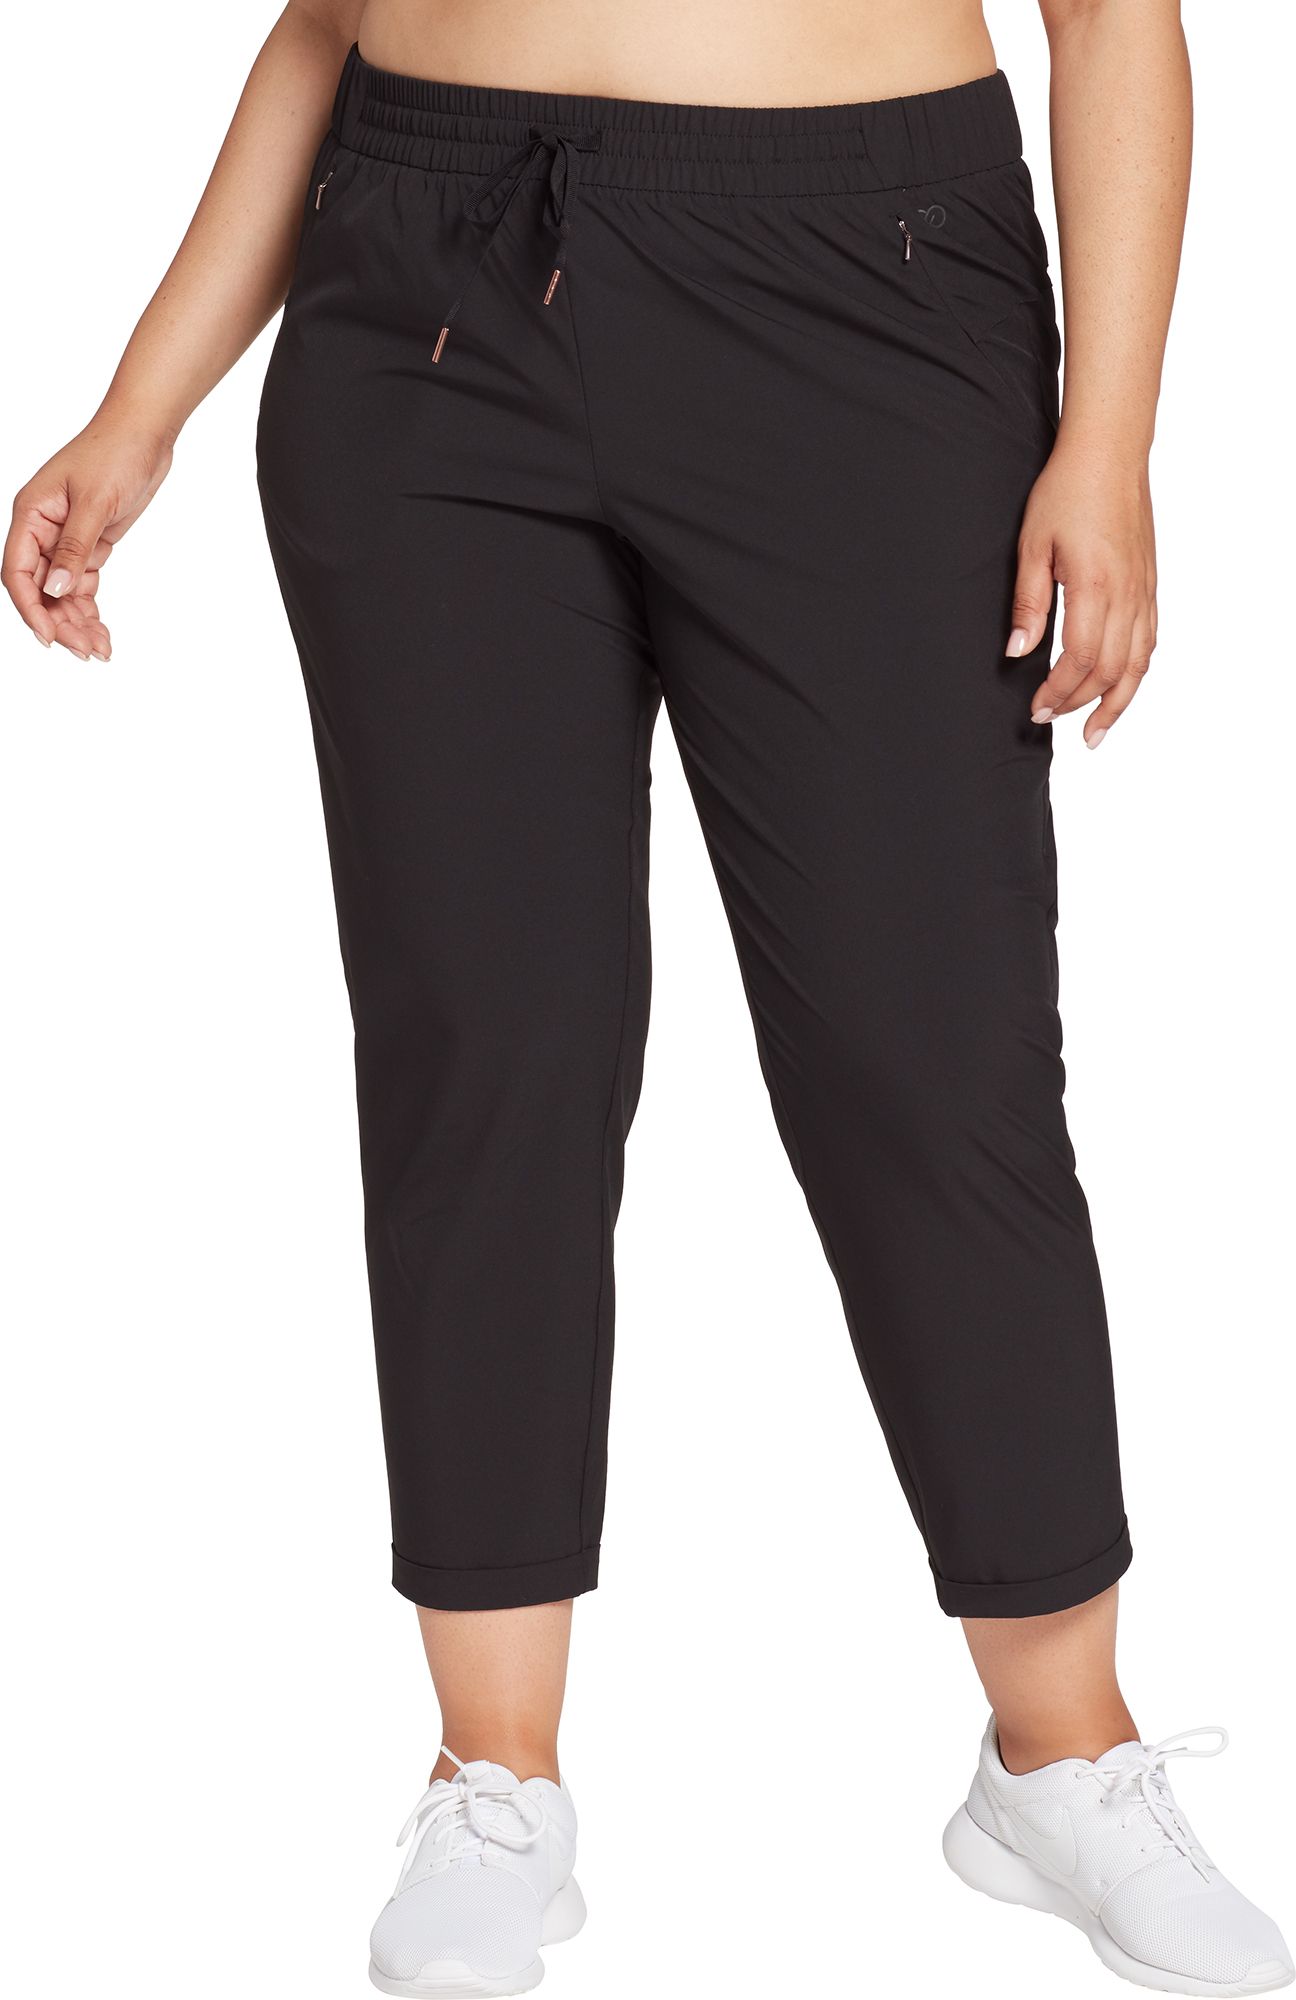 Pants Joggers Calia By Carrie Underwood